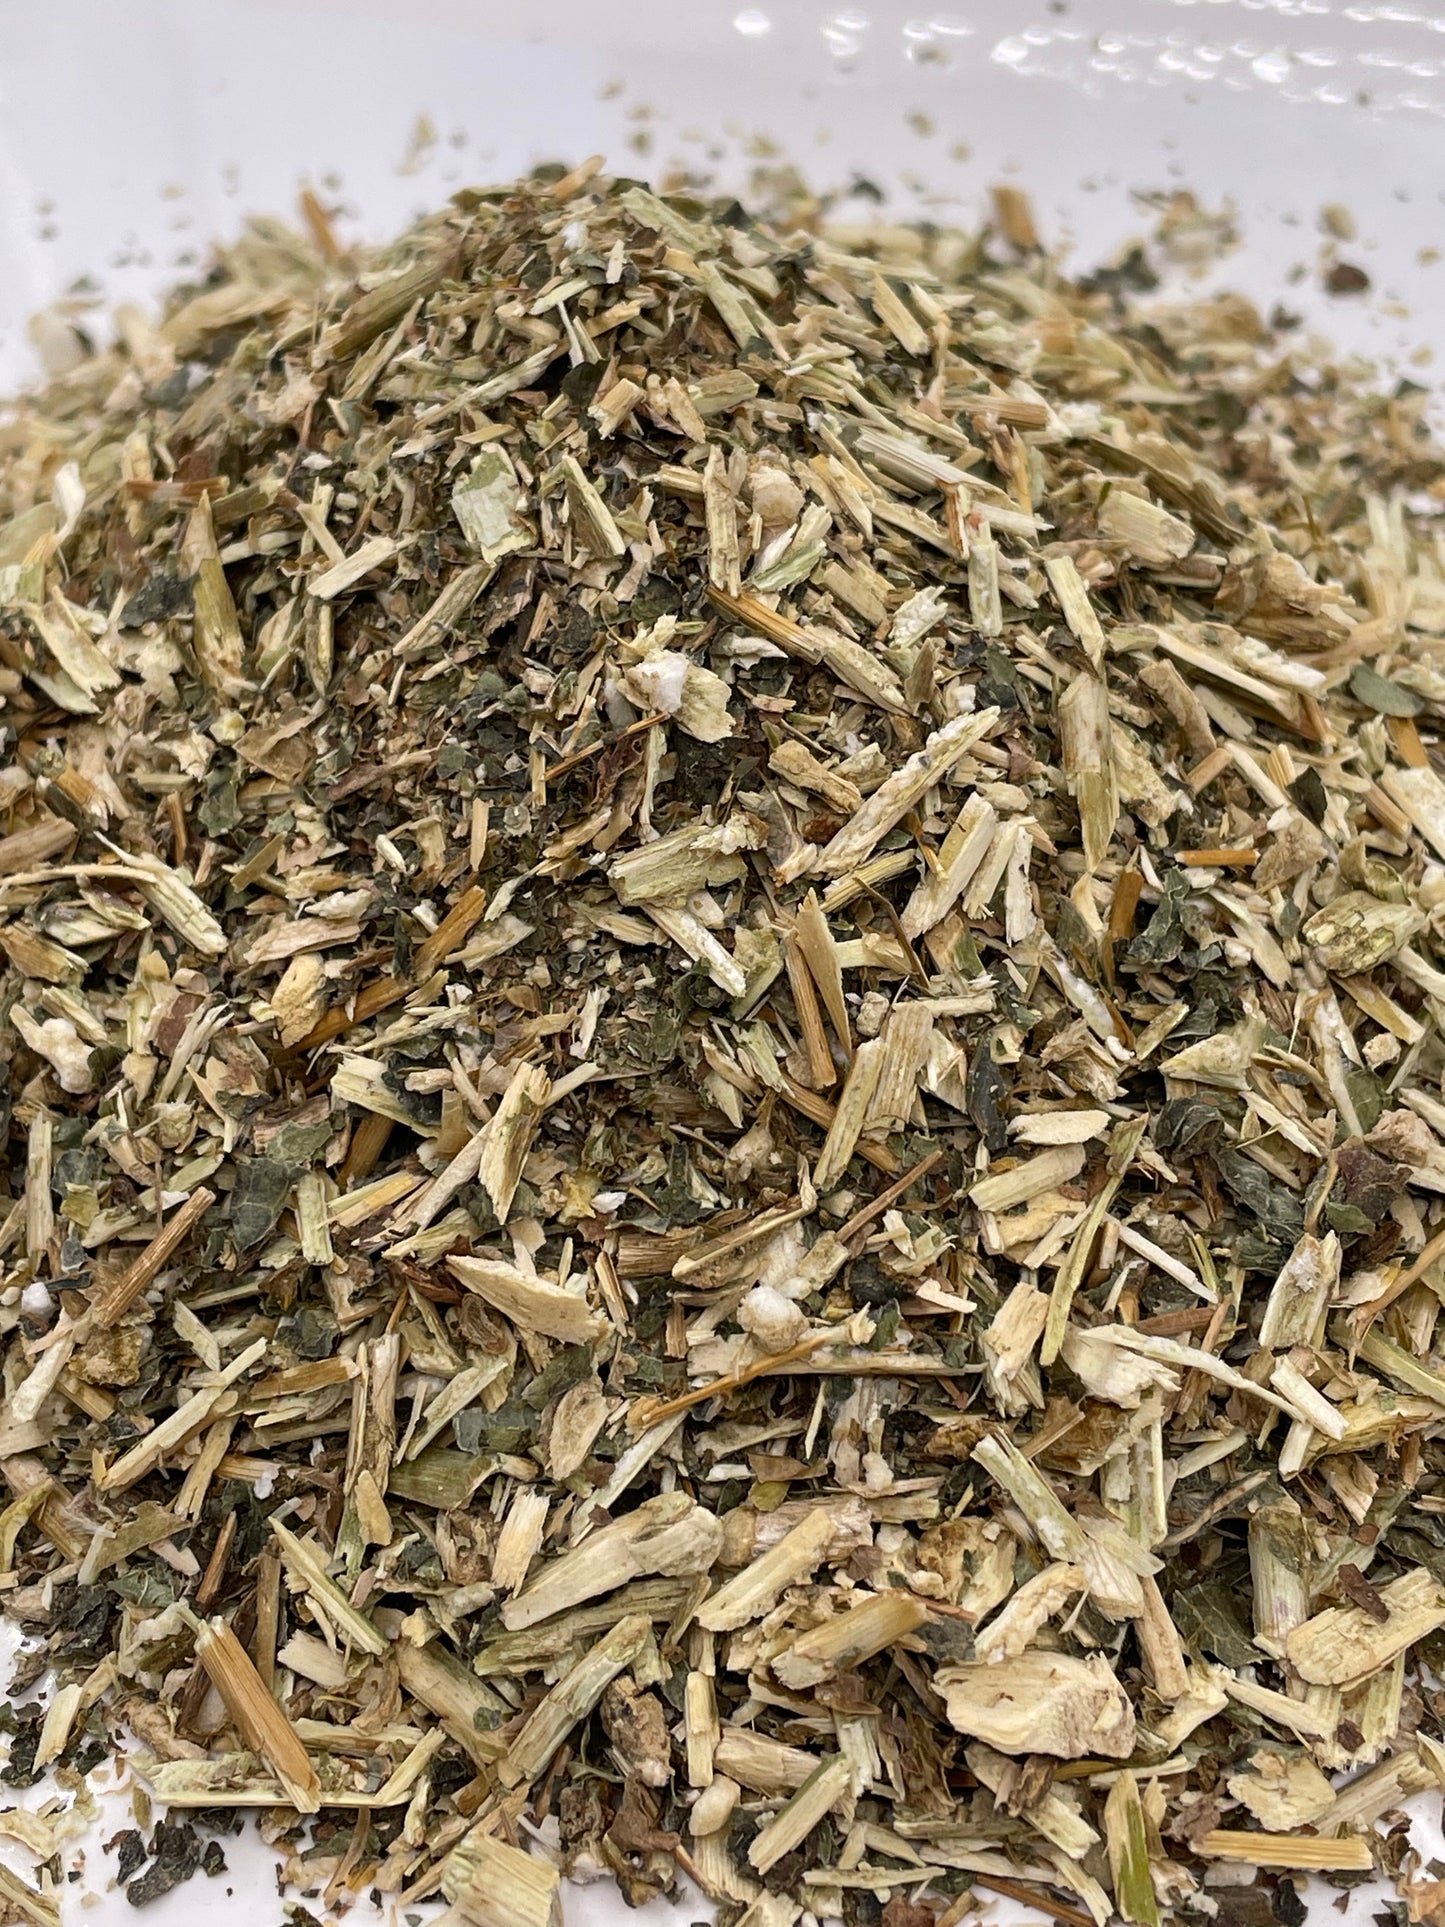 Wild Lettuce Herb, Dried Herbs, Food Grade Herbs, Herbs and Spices, Loose Leaf Herbs